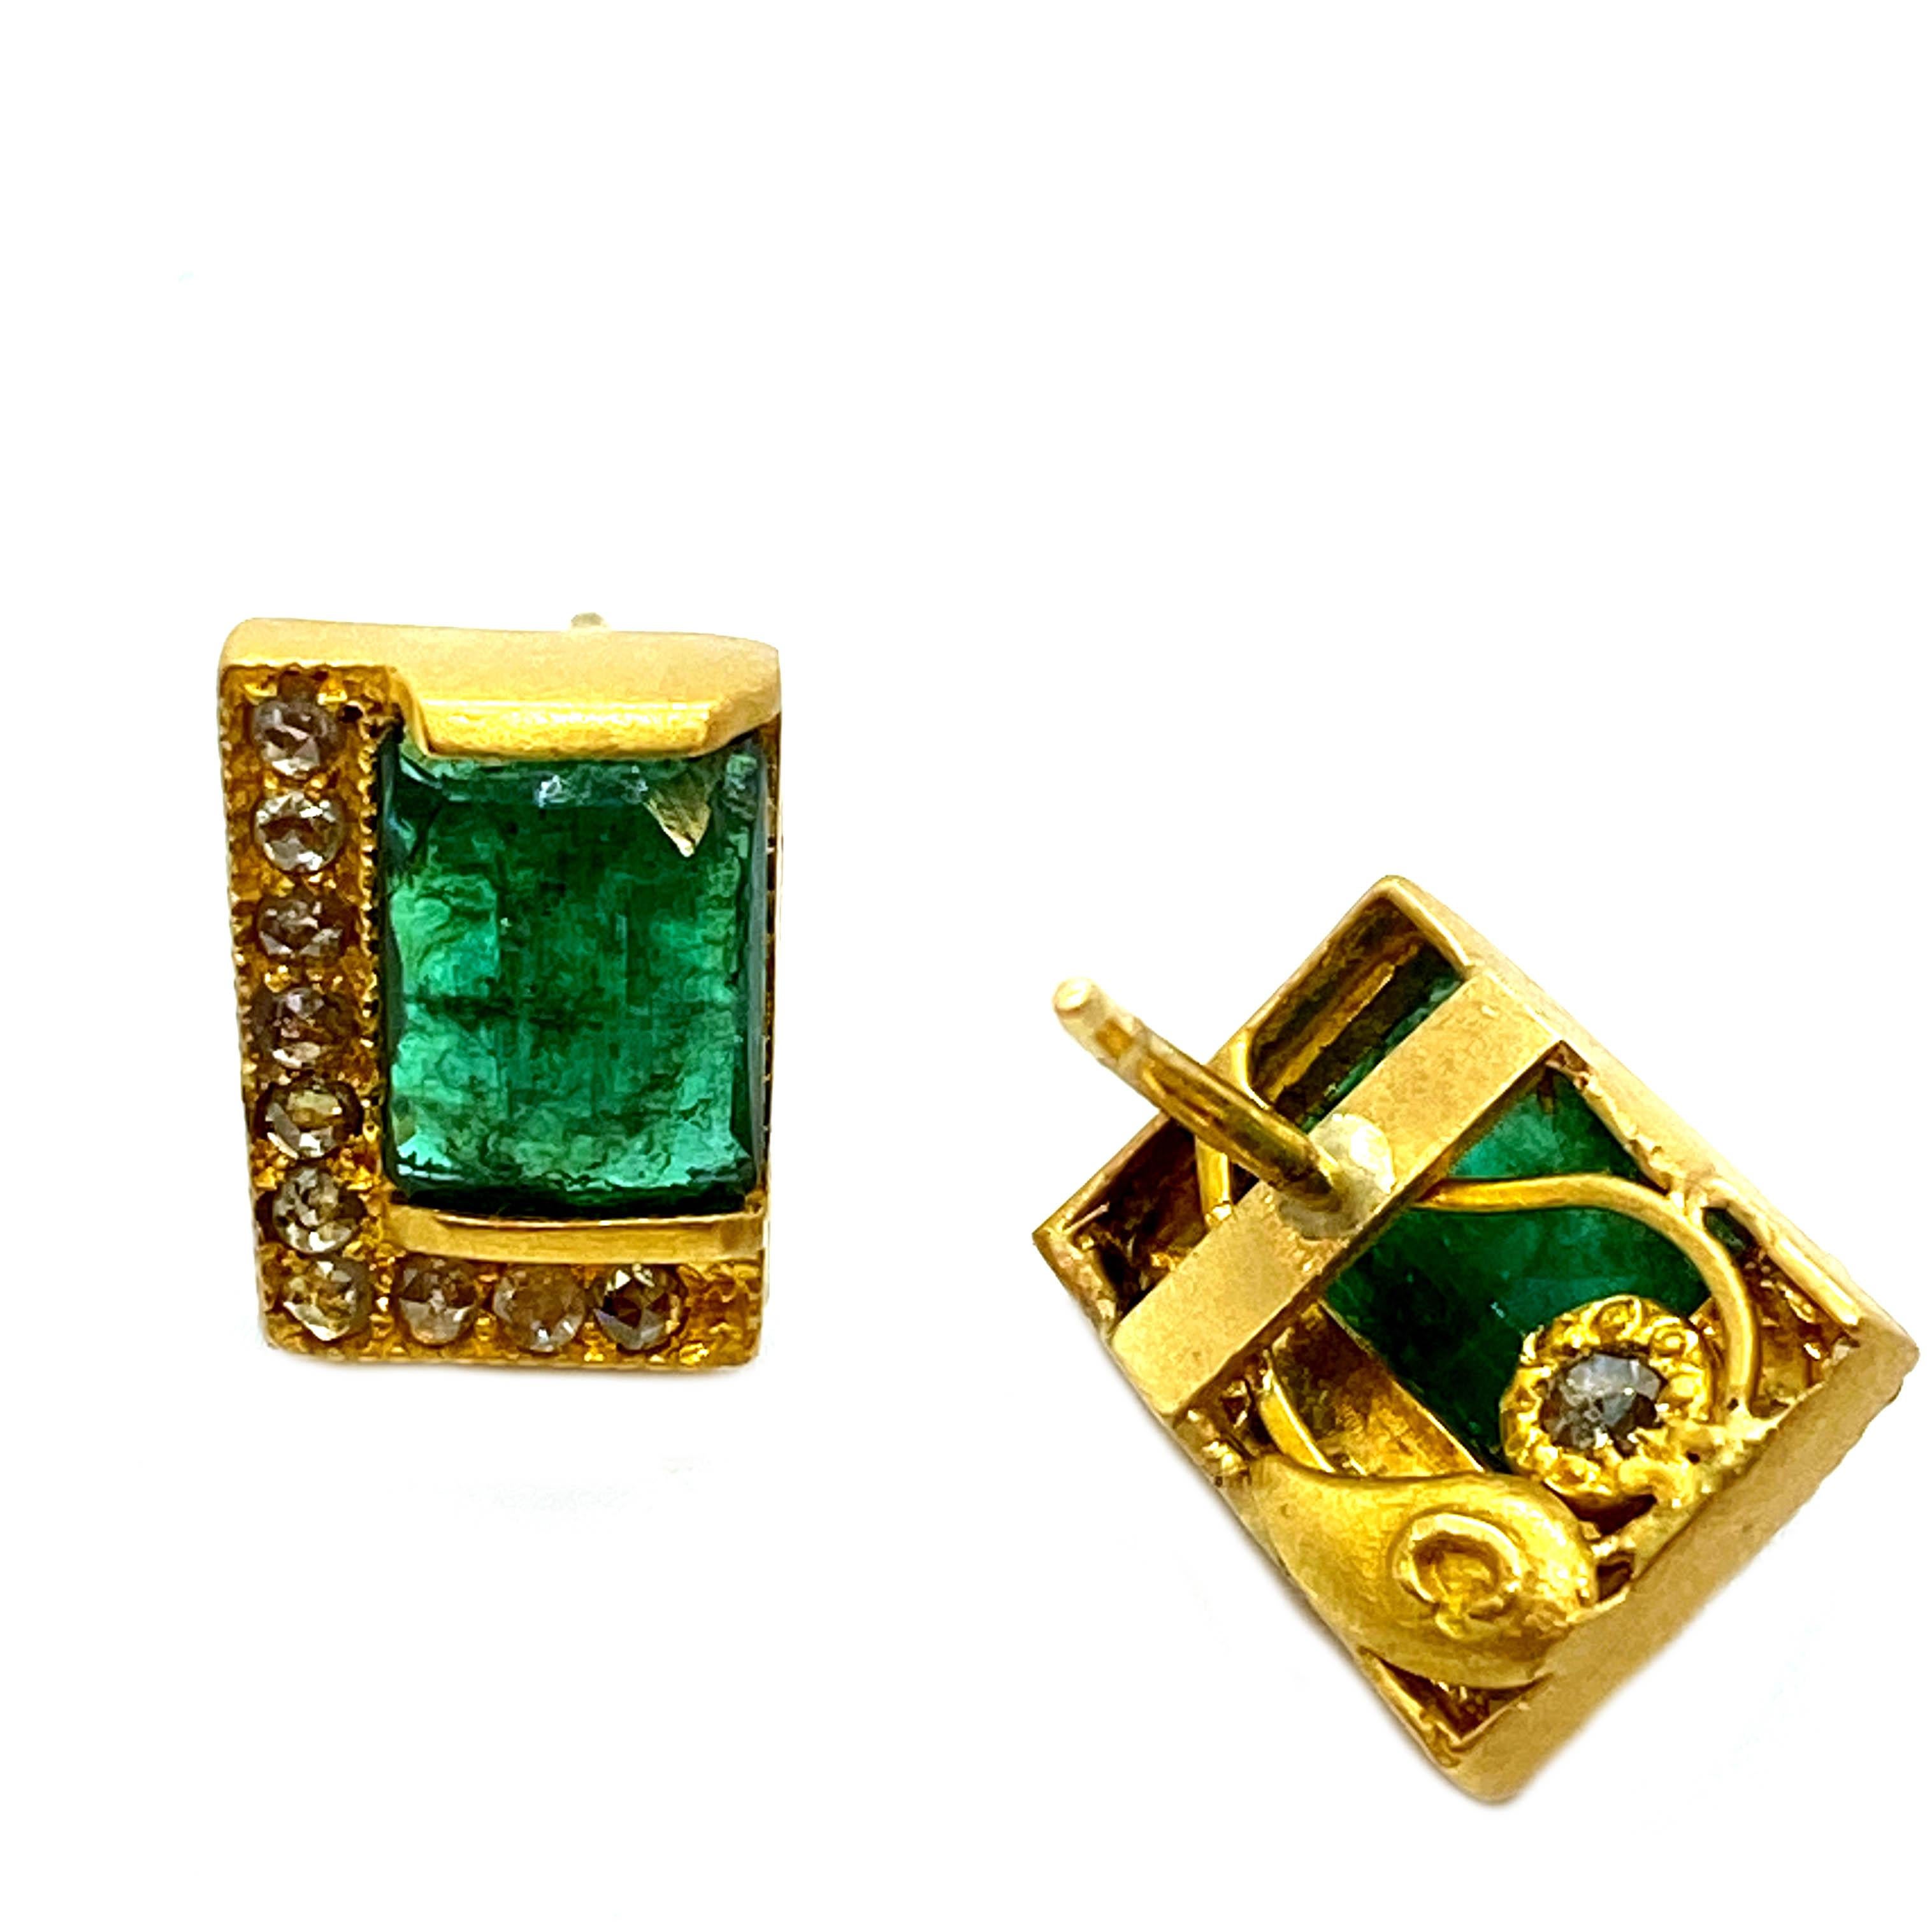 Beautifully crafted in 20K yellow gold showcasing Emerald weighing approximately 2.37cts and brilliant-cut diamonds, inspired by Art Deco and Mosaic art from the Luminosity Collection of Coomi, which represents bold design and reflects light from